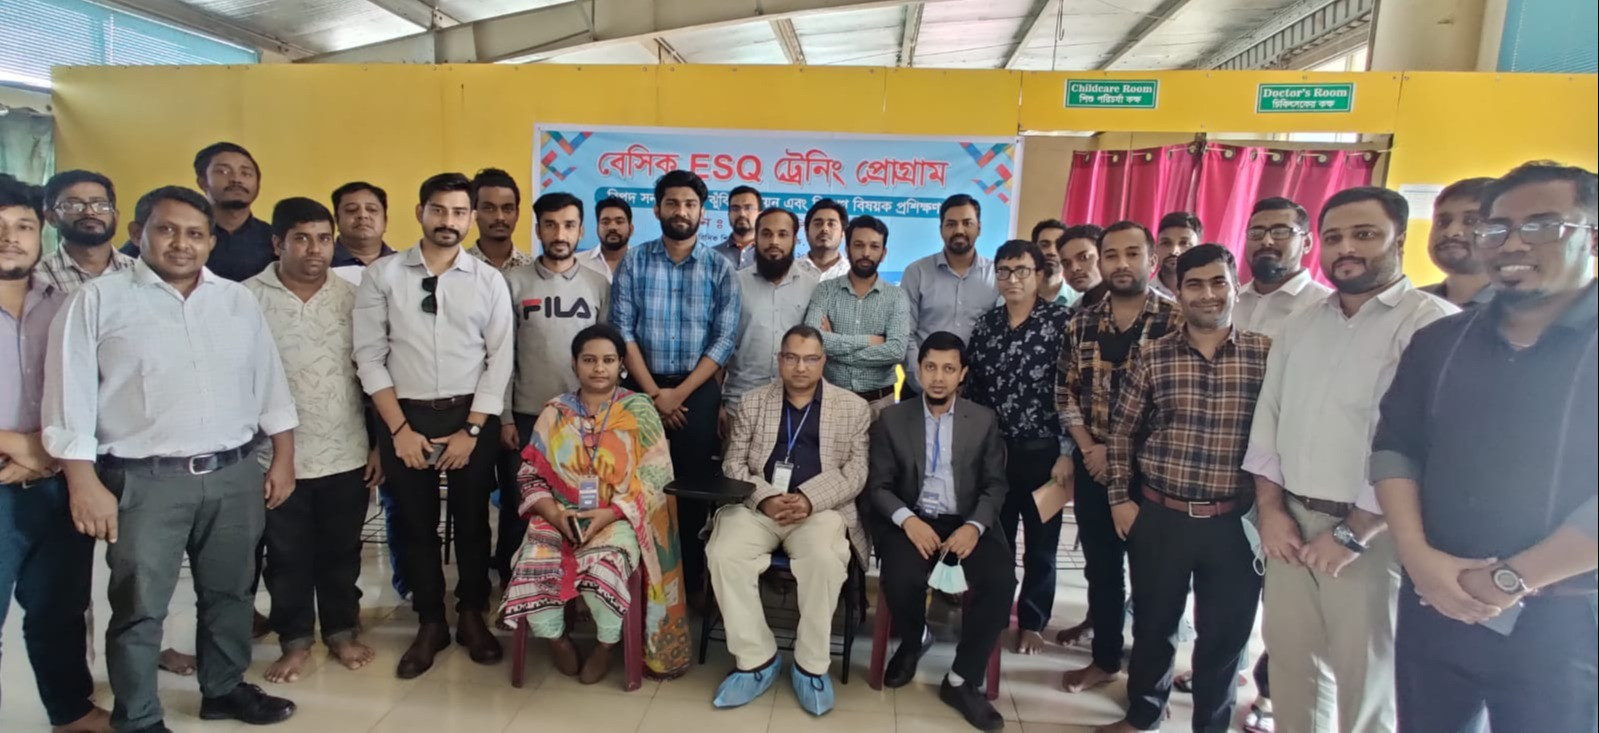 Another successful training session in the books! Our team conducted an ESQ training at Astech in Chittagong on the topic of Hazard Identification, Risk Assessment, and Control. featured image